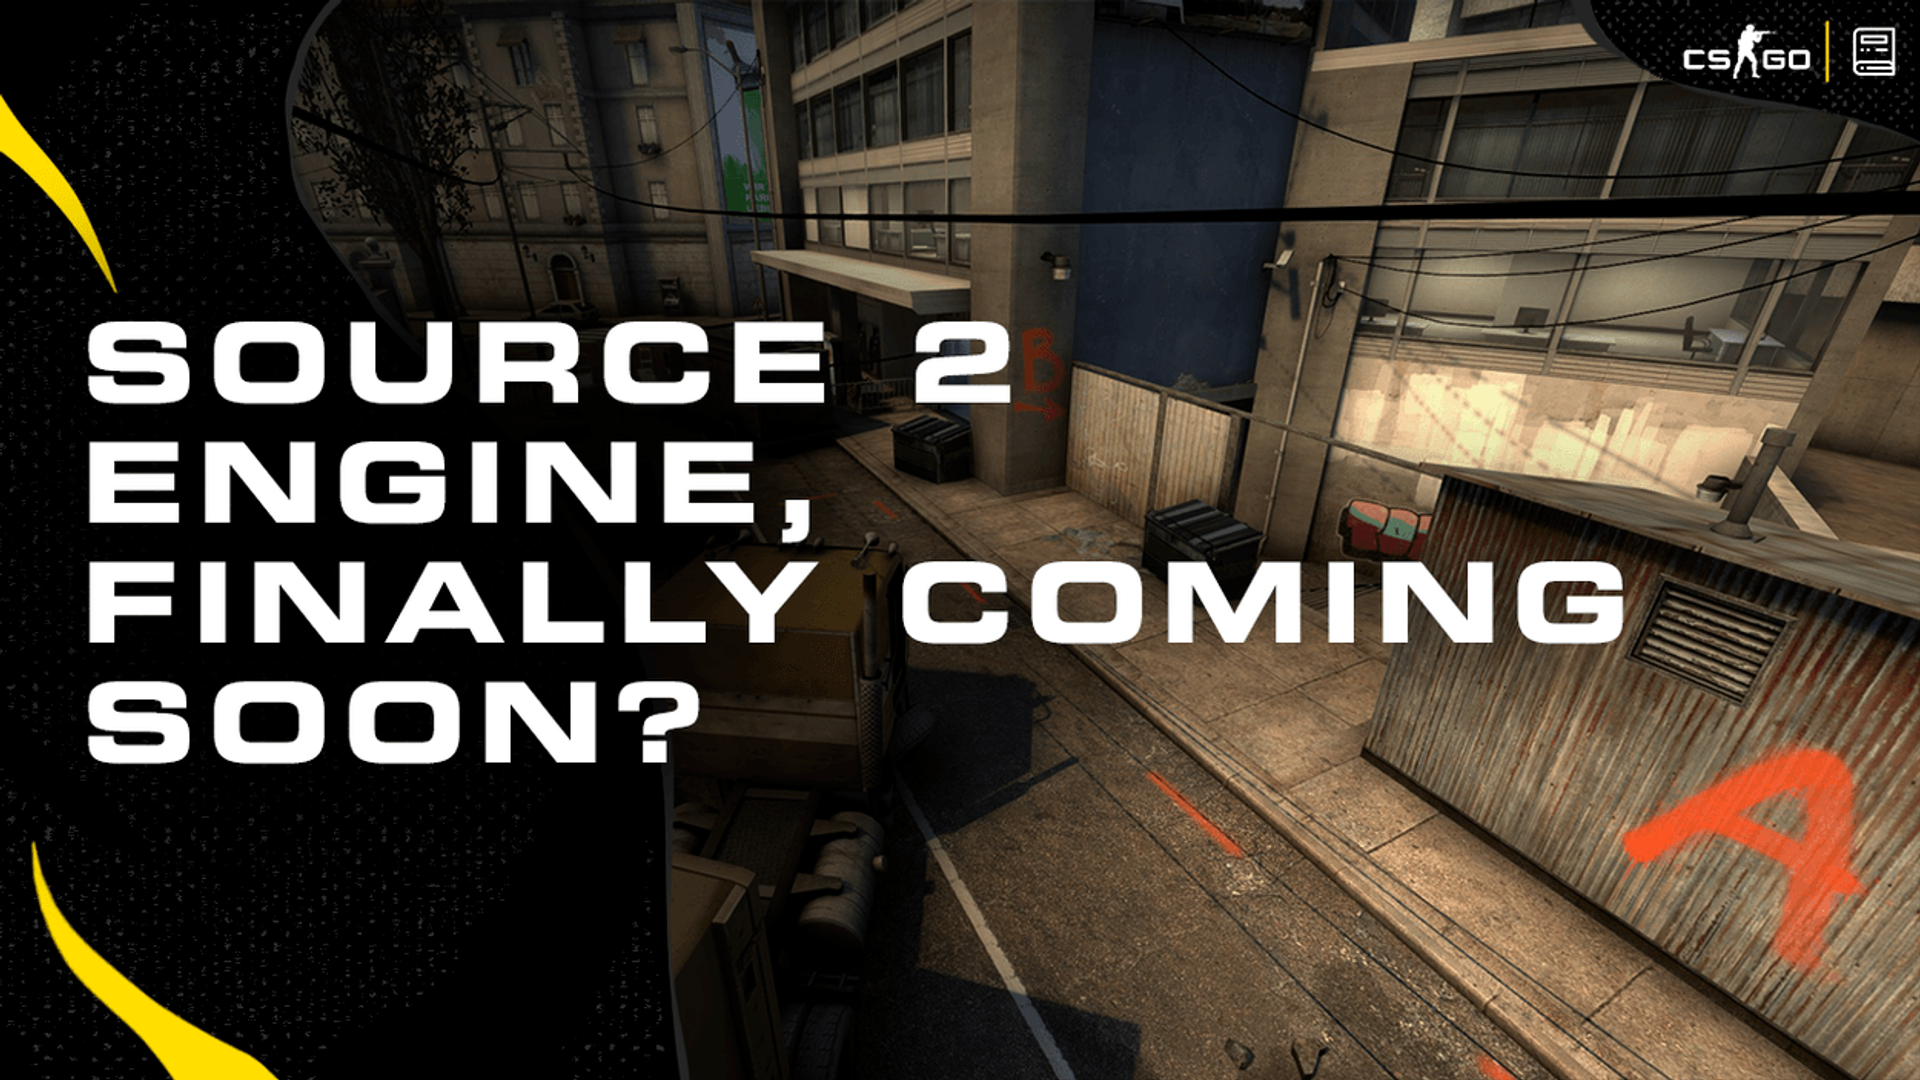 CSGO May Receive Source 2 Engine Upgrade Soon